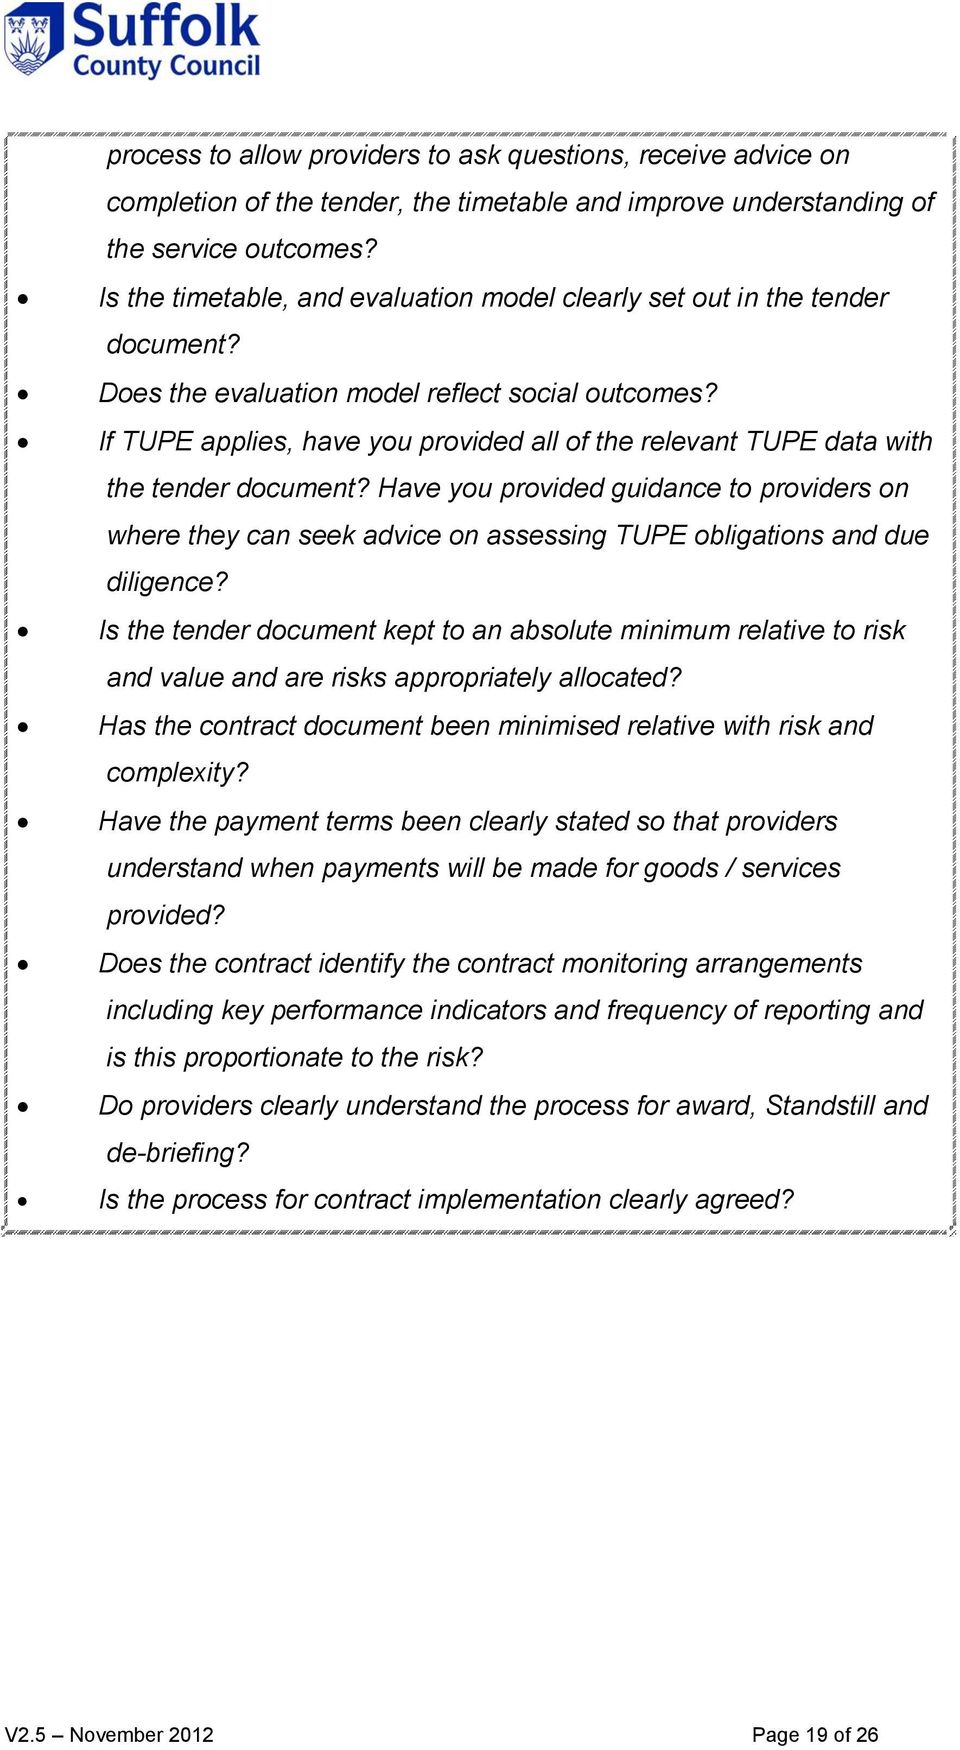 If TUPE applies, have you provided all of the relevant TUPE data with the tender document?